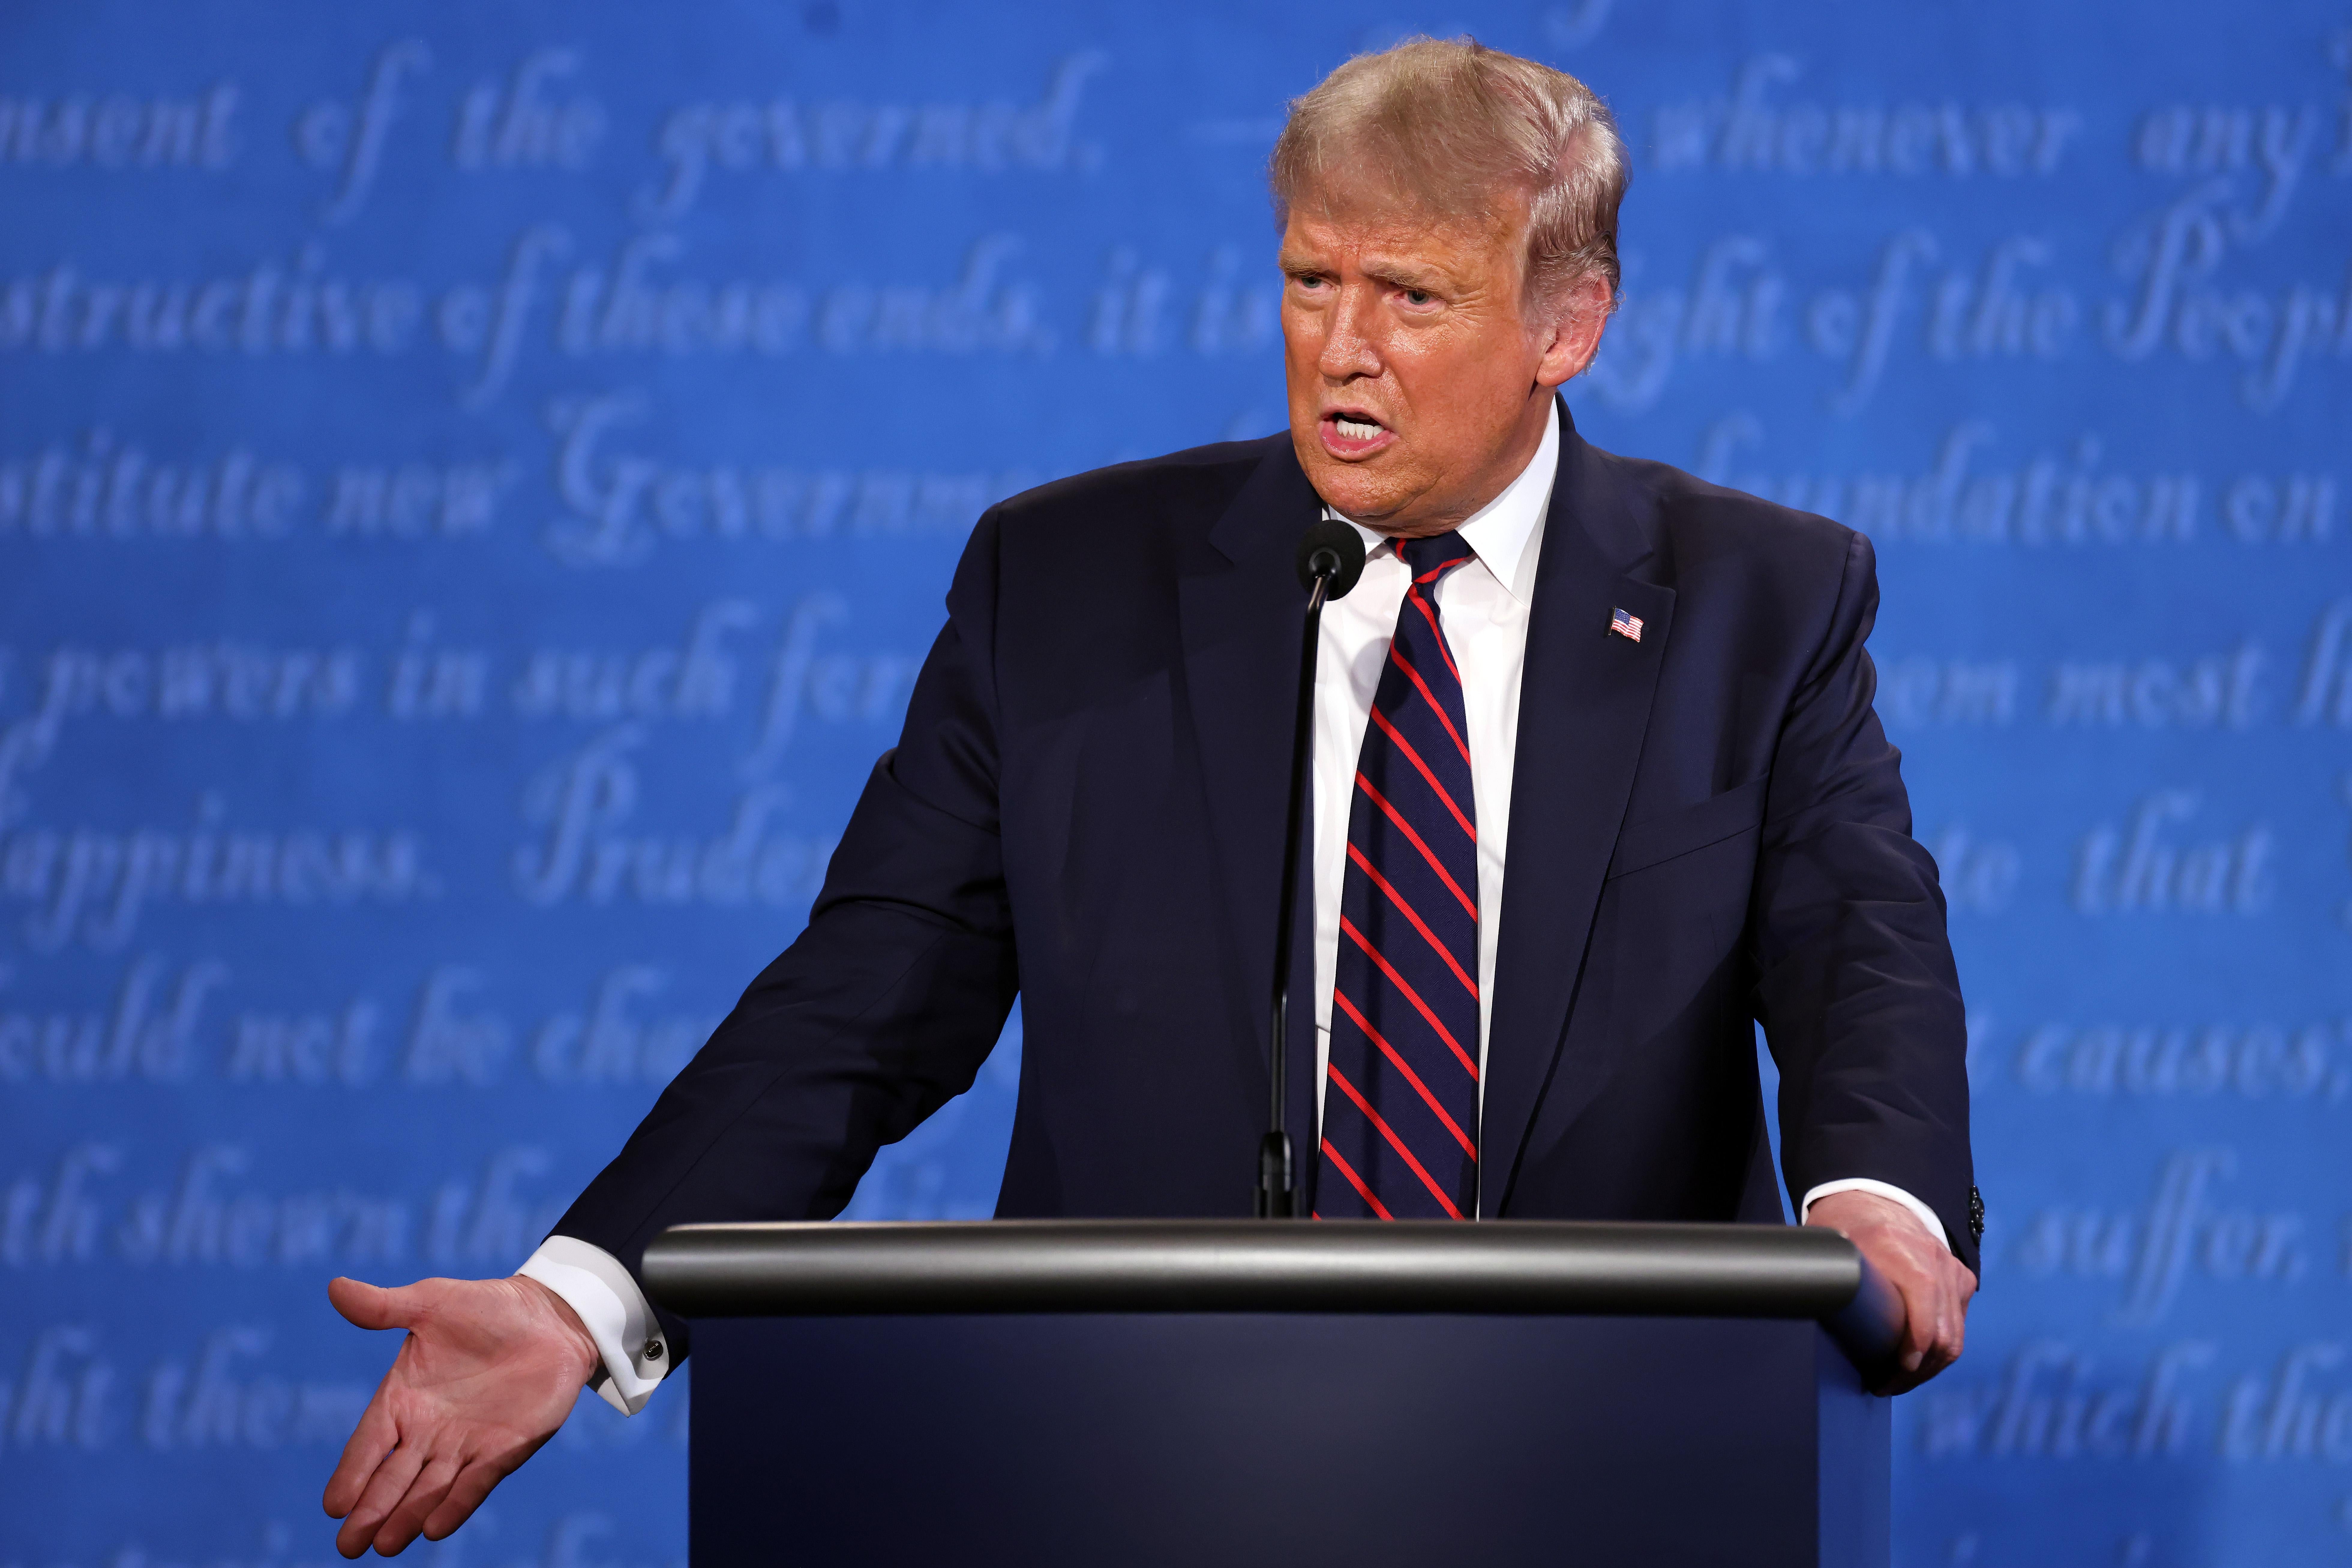 Trump gestures with his right hand as he stands at the podium on stage, answering a debate question.